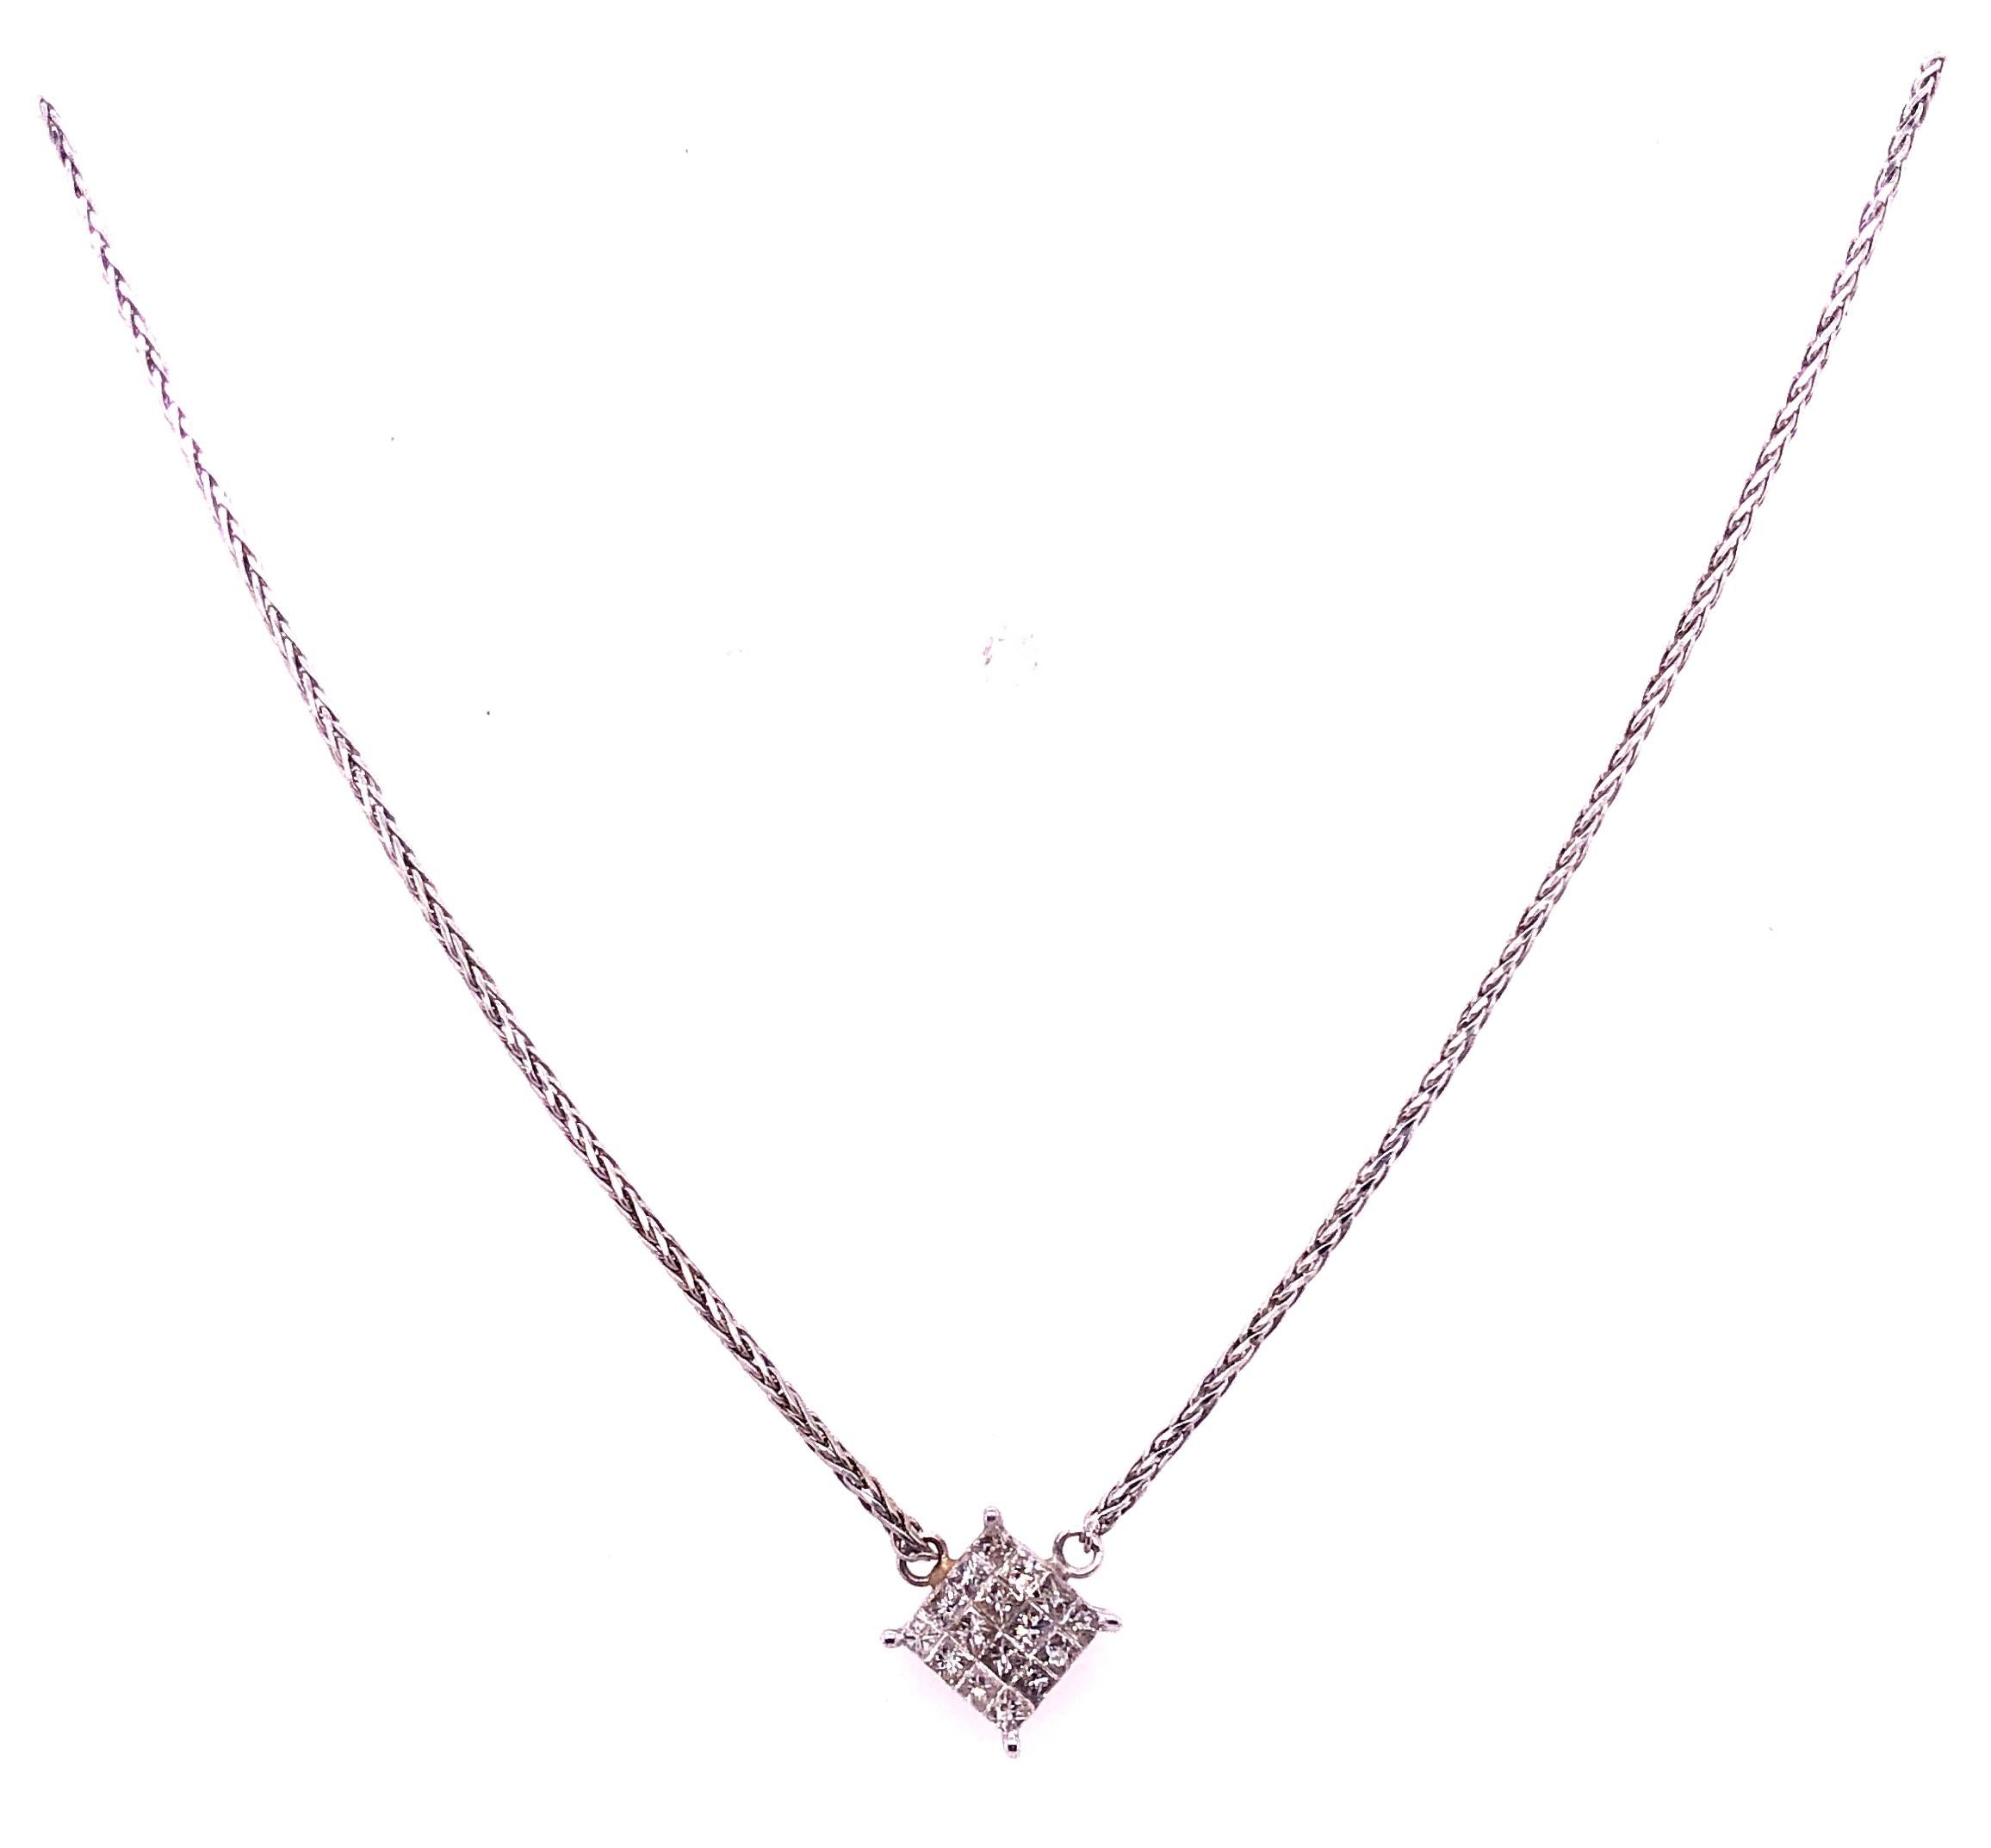 14 Karat White Gold 16 Inch Necklace with Diamond Pendant.
0.50 total diamond weight.
3.45 grams total weight.
pendant size: 7.20 mm square.